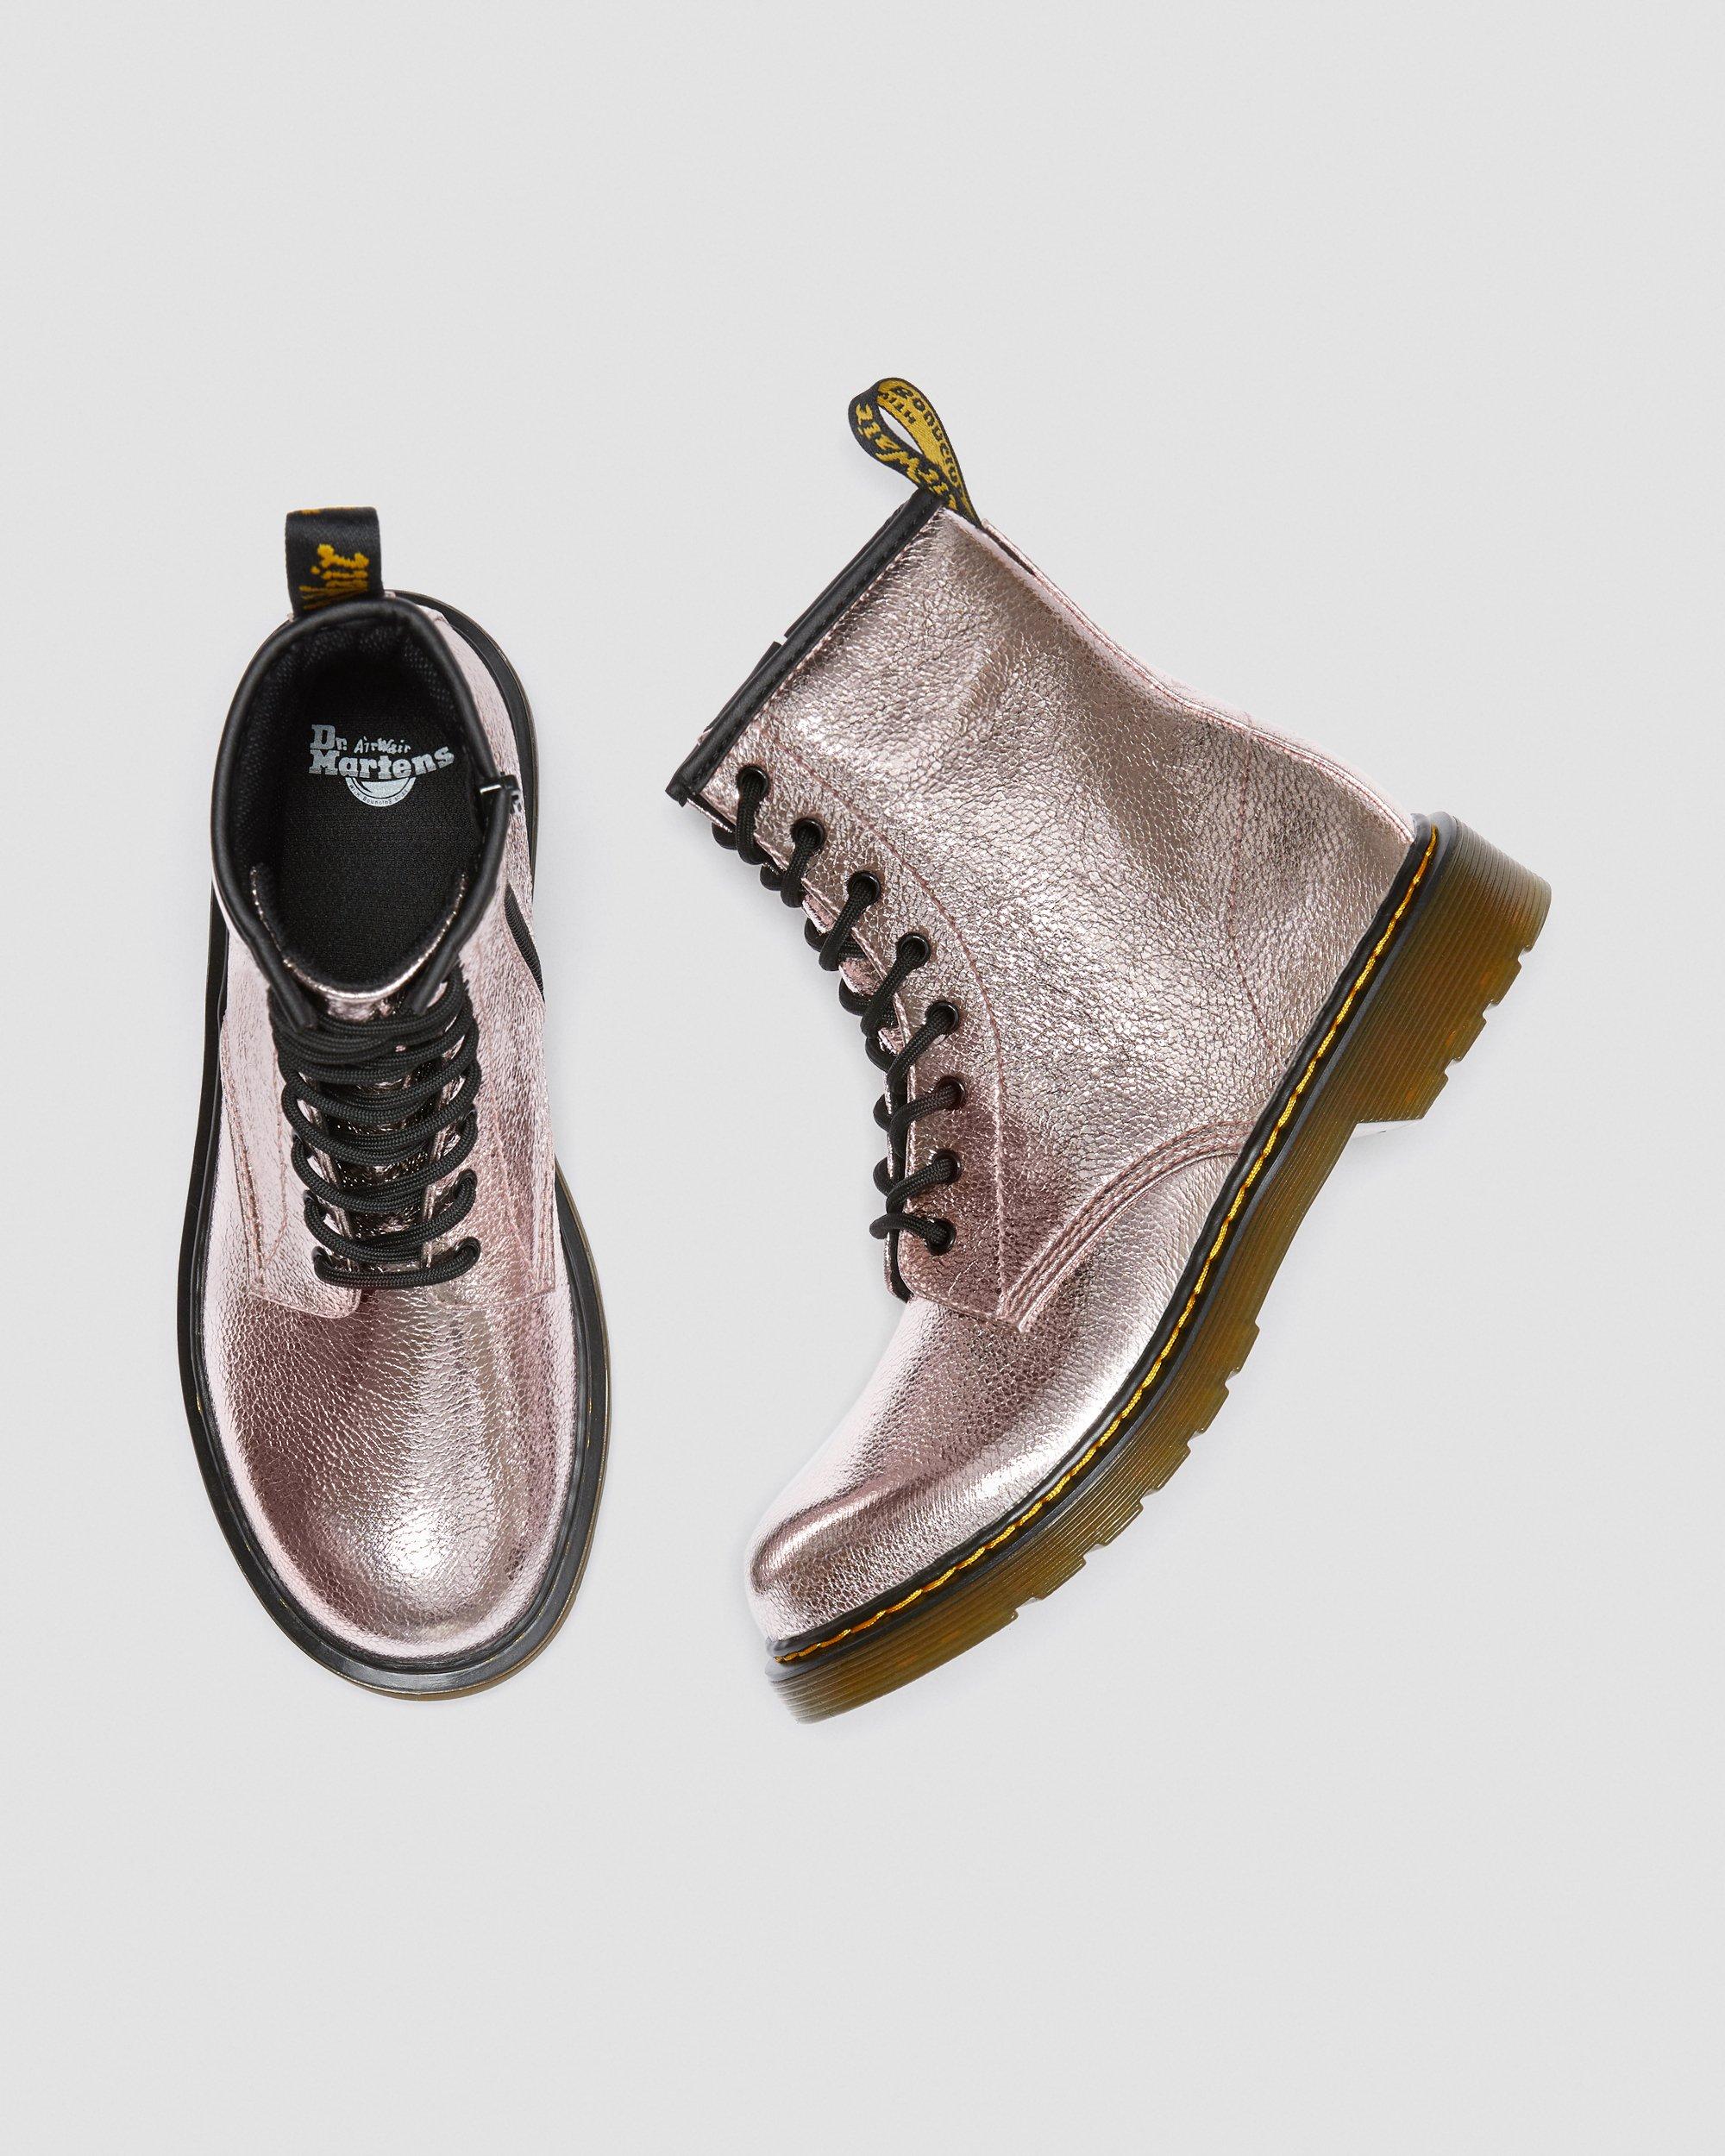 Youth 1460 Crinkle Metallic Boots in Rosa